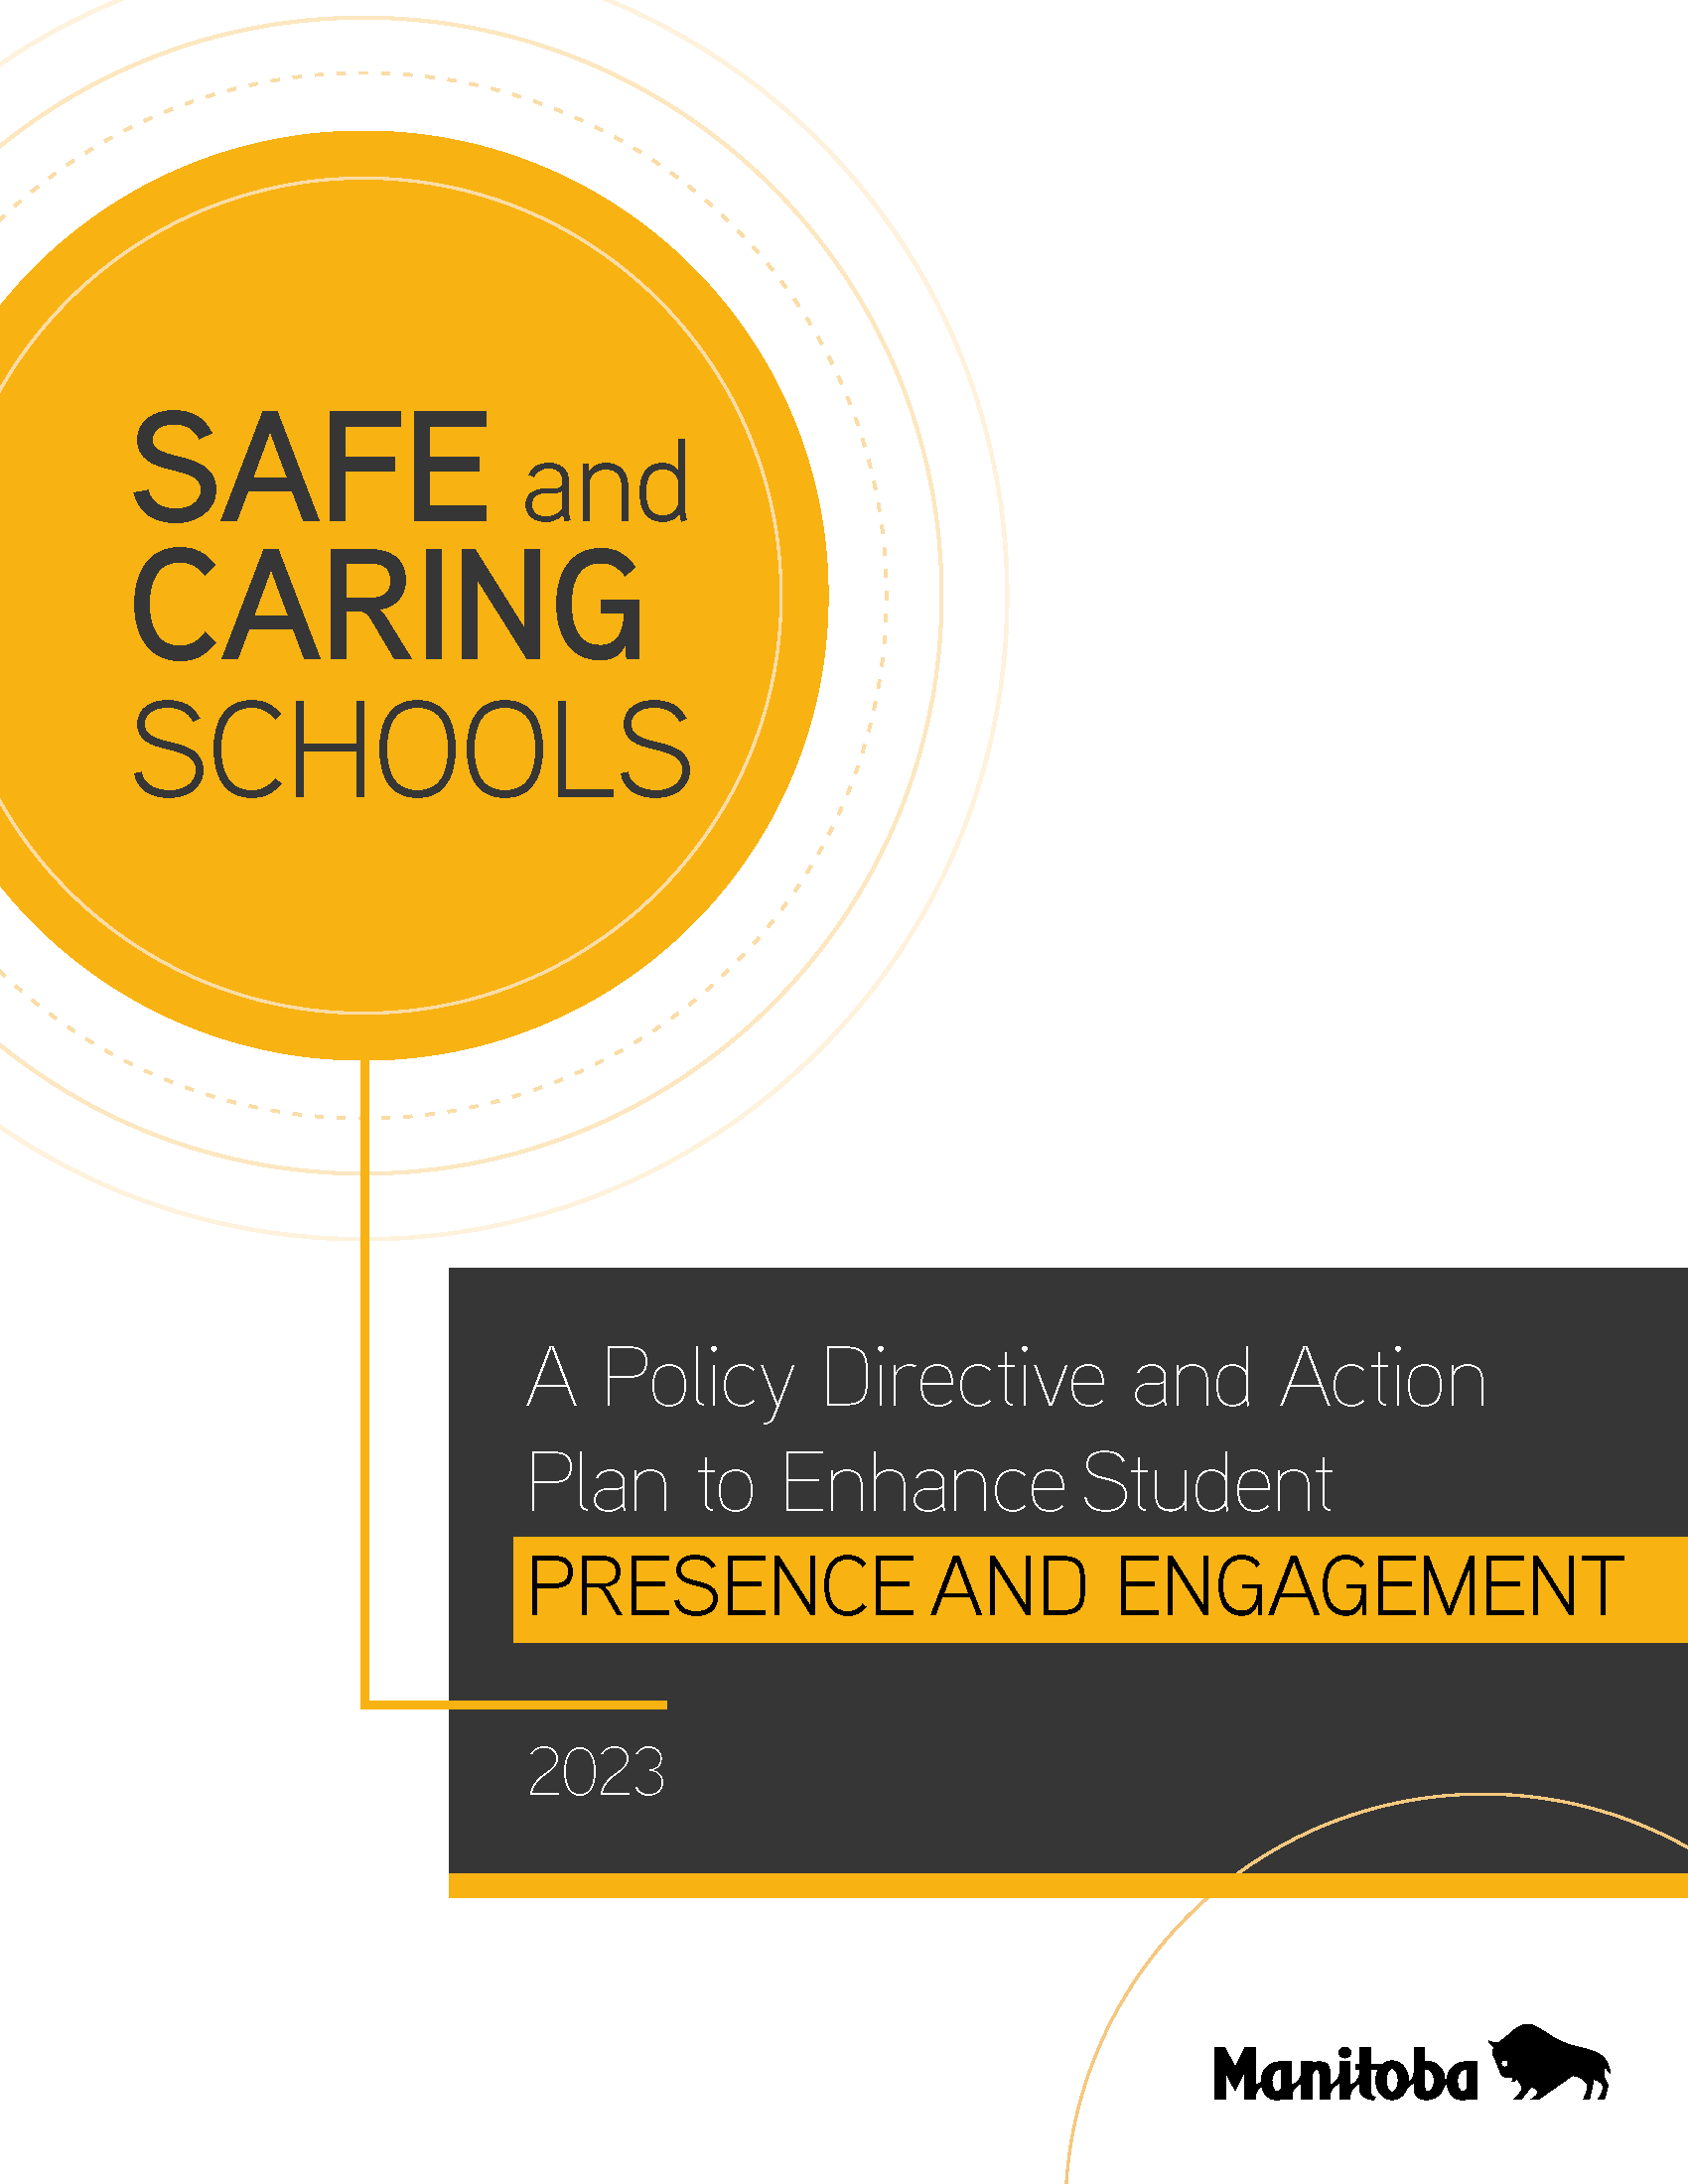 Safe and Caring Schools: A Policy Directive and Action Plan to Enhance Student Presence and Engagement 